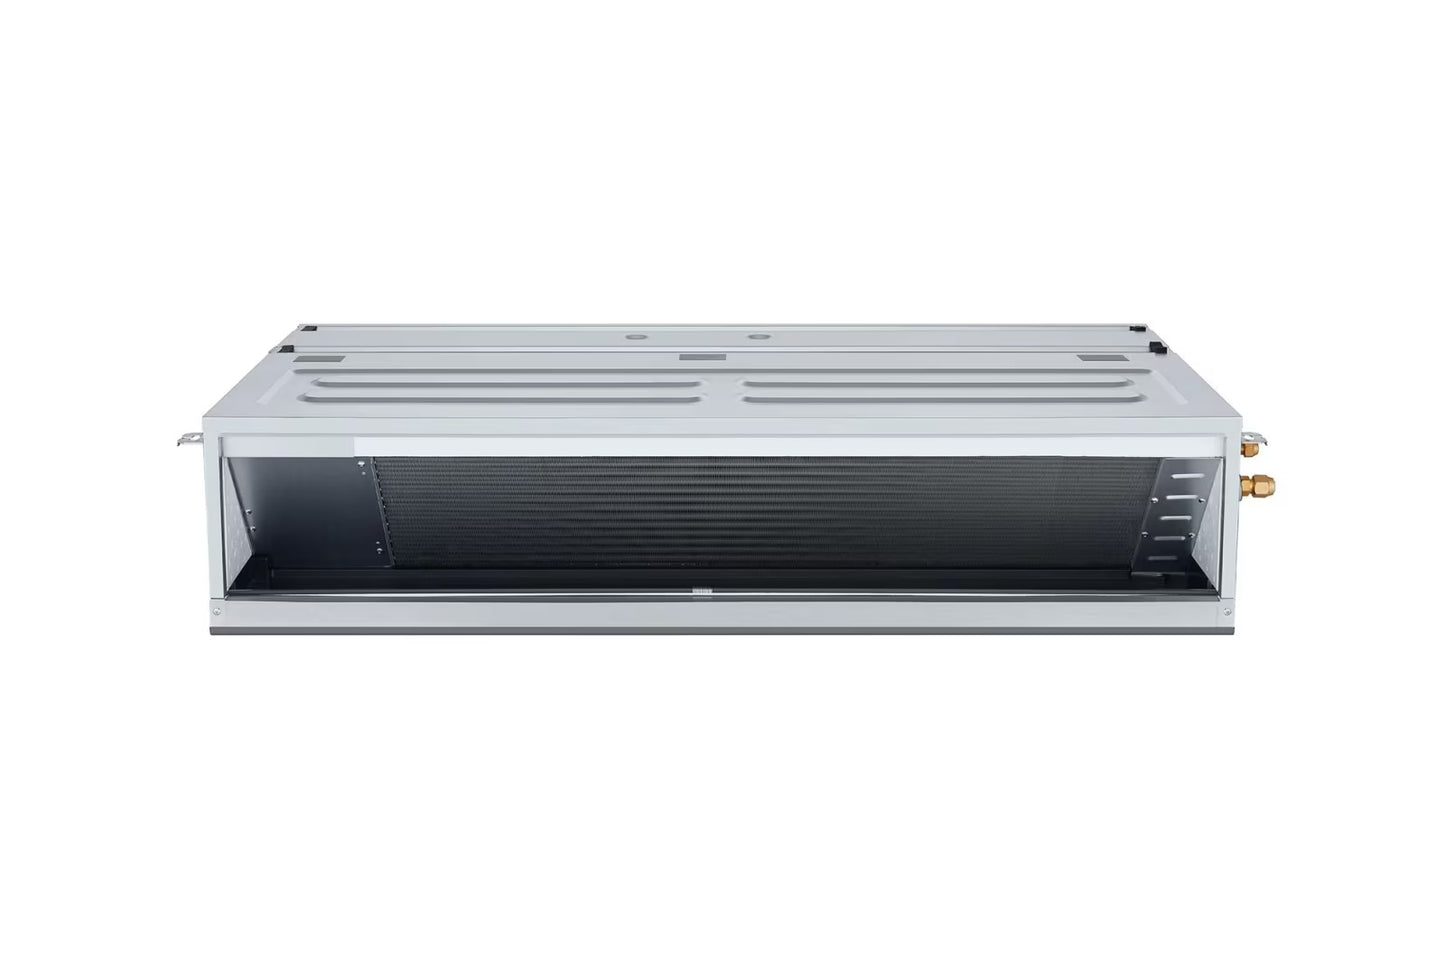 LG Ceiling Concealed Duct INV Unit 7.1KW with Mid Static and E.S.P. Control for Multiple Rooms - ARNU24GM1A4